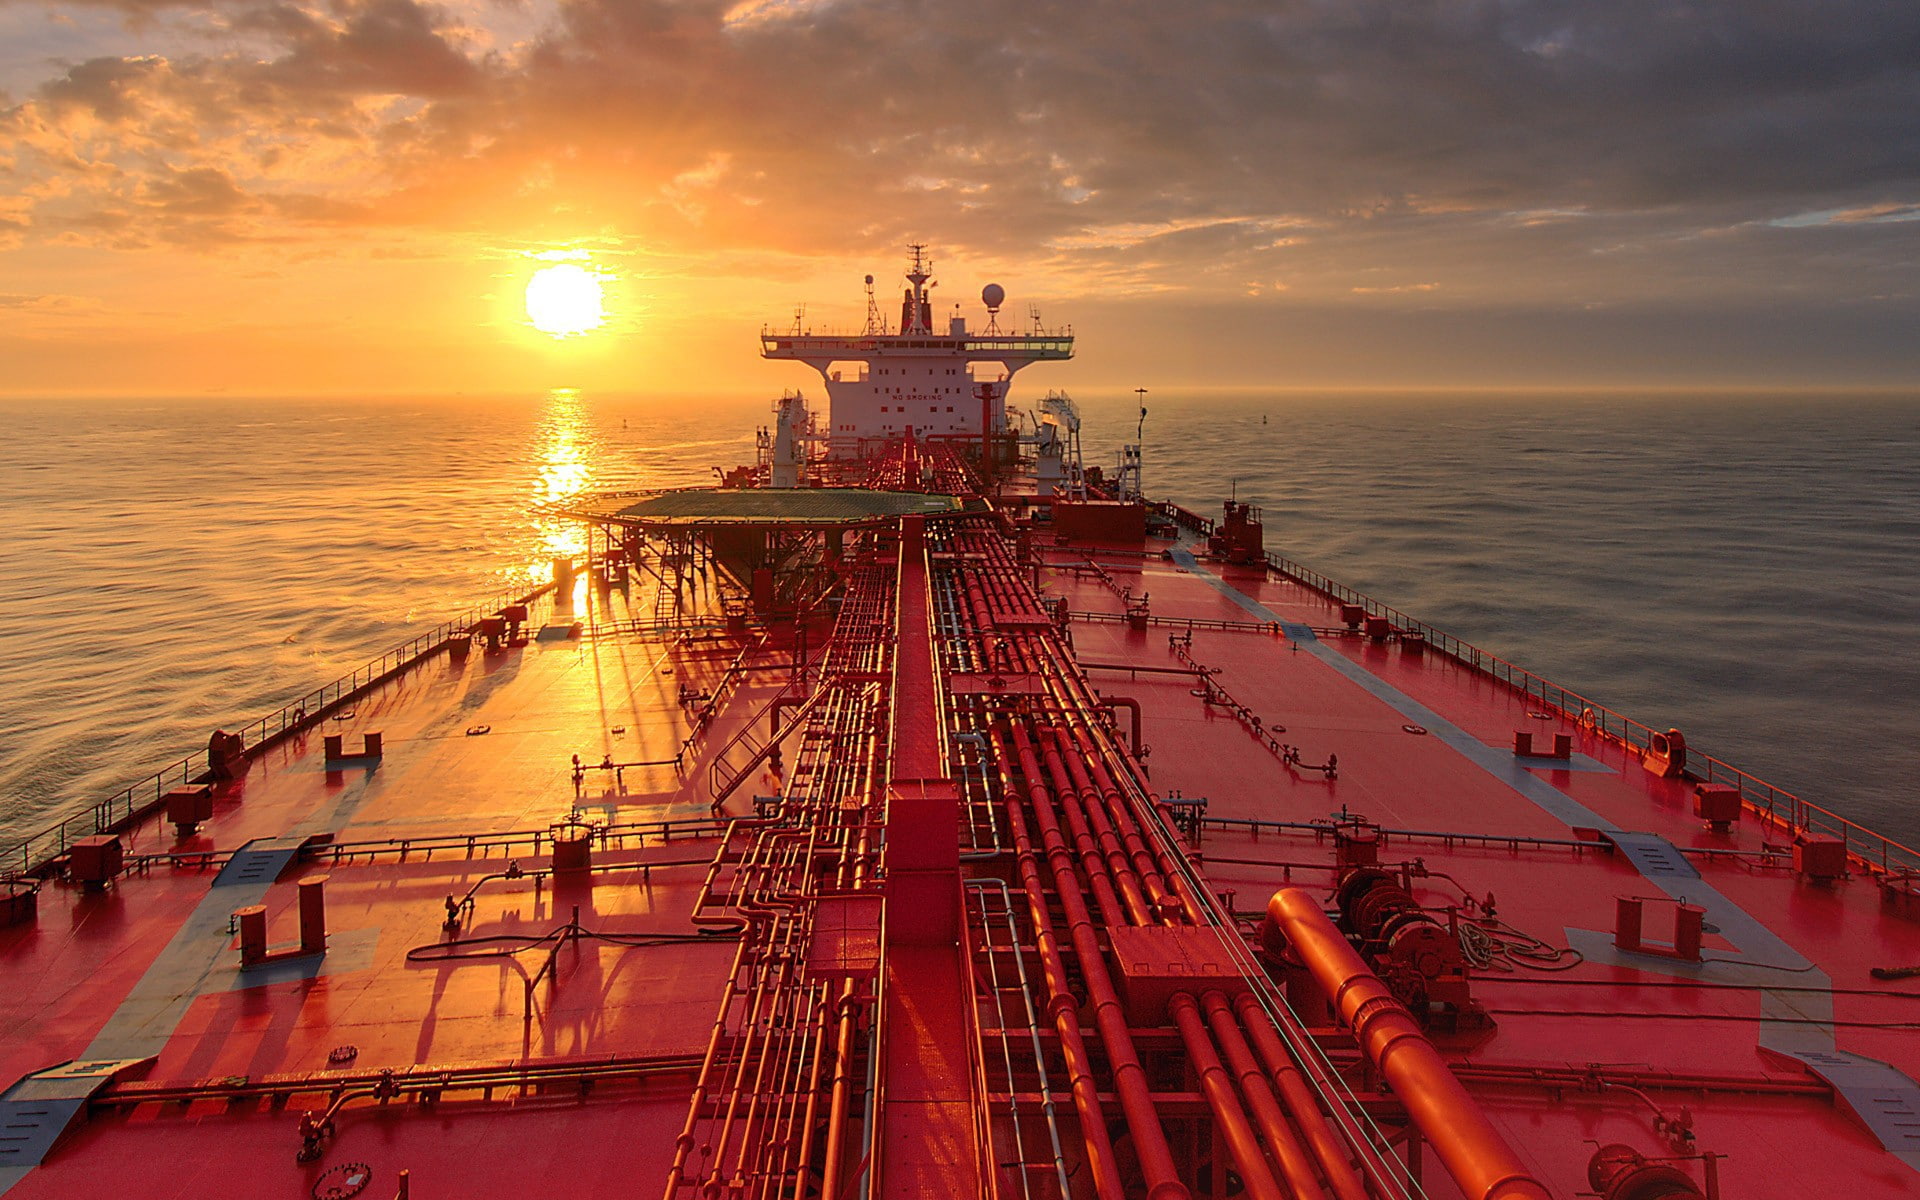 Ship Tanker, SIZE, Red, distance, horizon, sky, clouds, sunrise